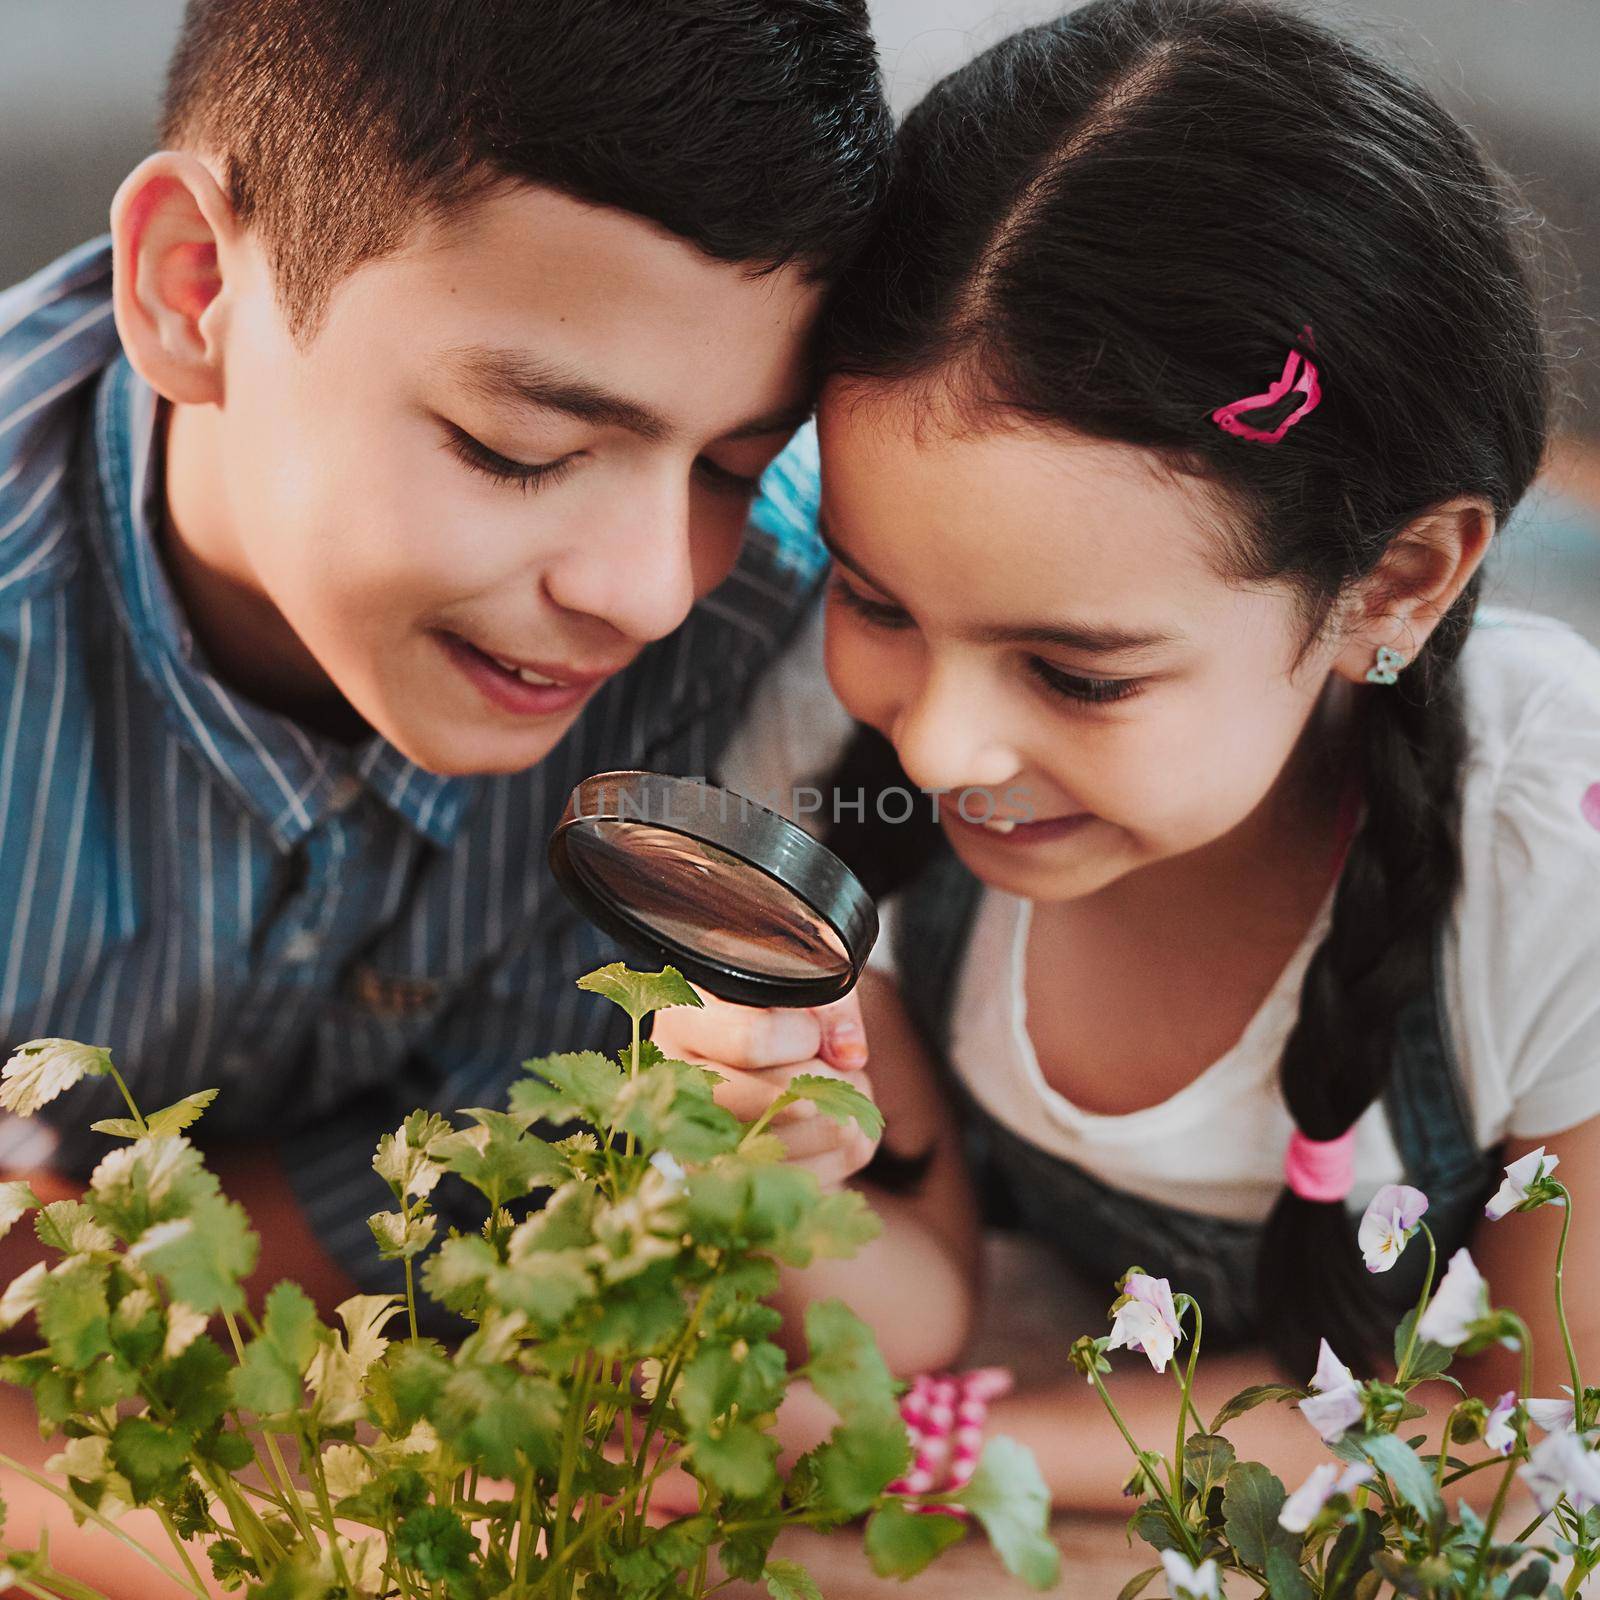 Cropped shot of two adorable young siblings looking through a magnifying glass while experimenting with plants at home.